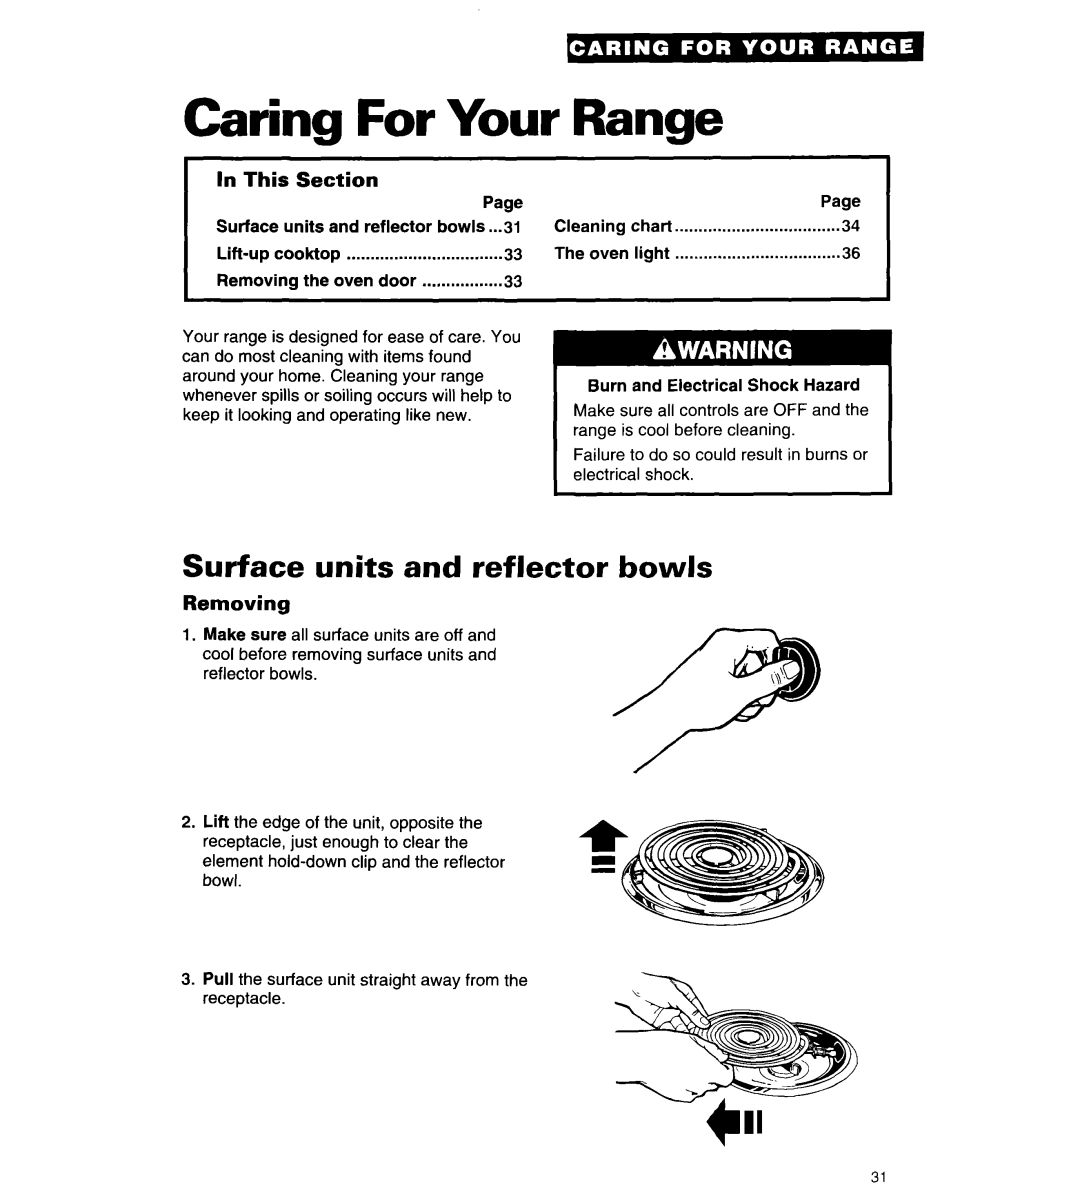 Whirlpool RF315PCY Caring For Your Range, Surface units and reflector bowls, In This Section, Removing 